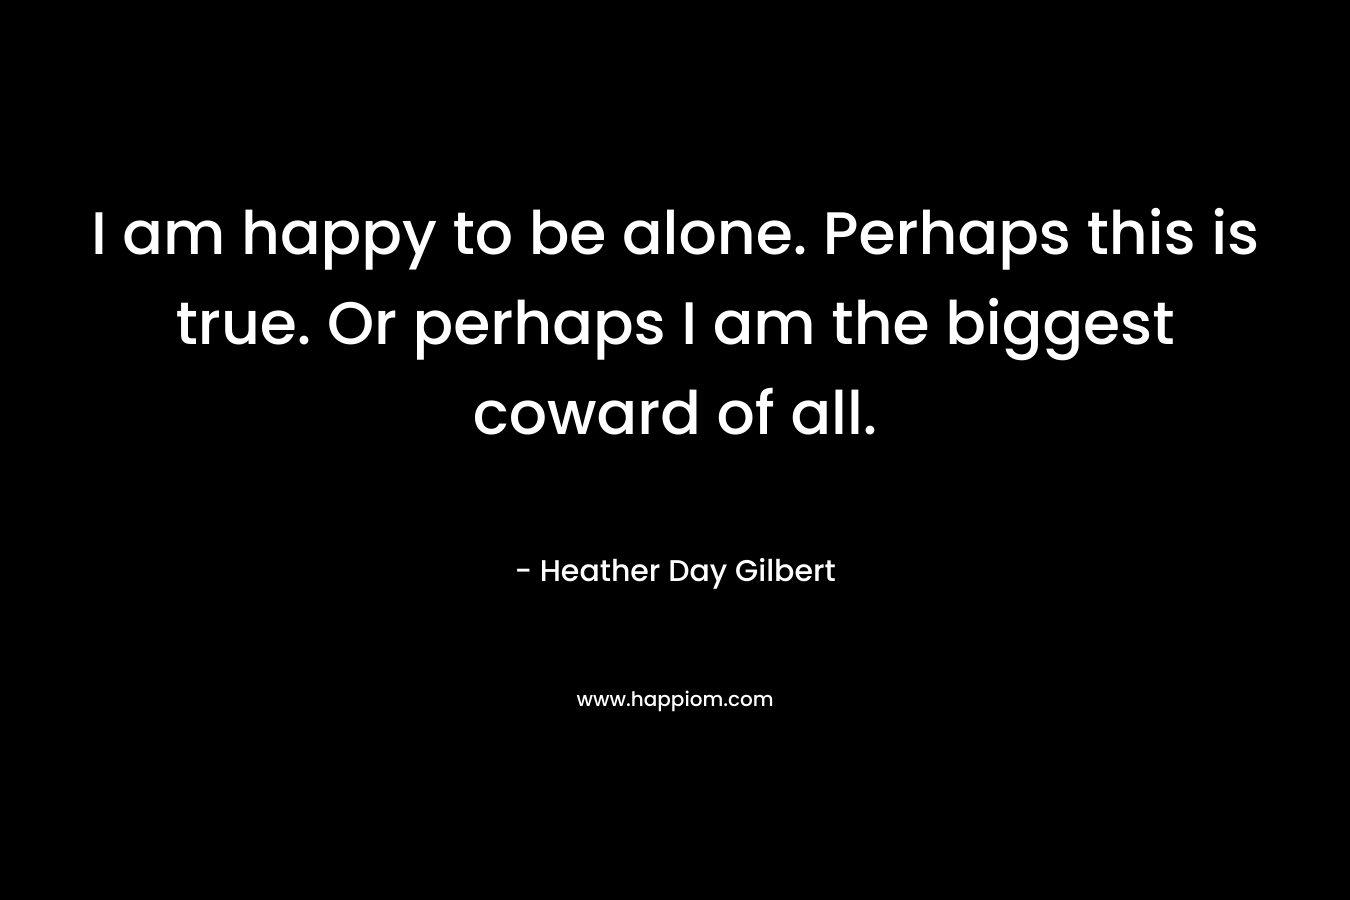 I am happy to be alone. Perhaps this is true. Or perhaps I am the biggest coward of all. – Heather Day Gilbert